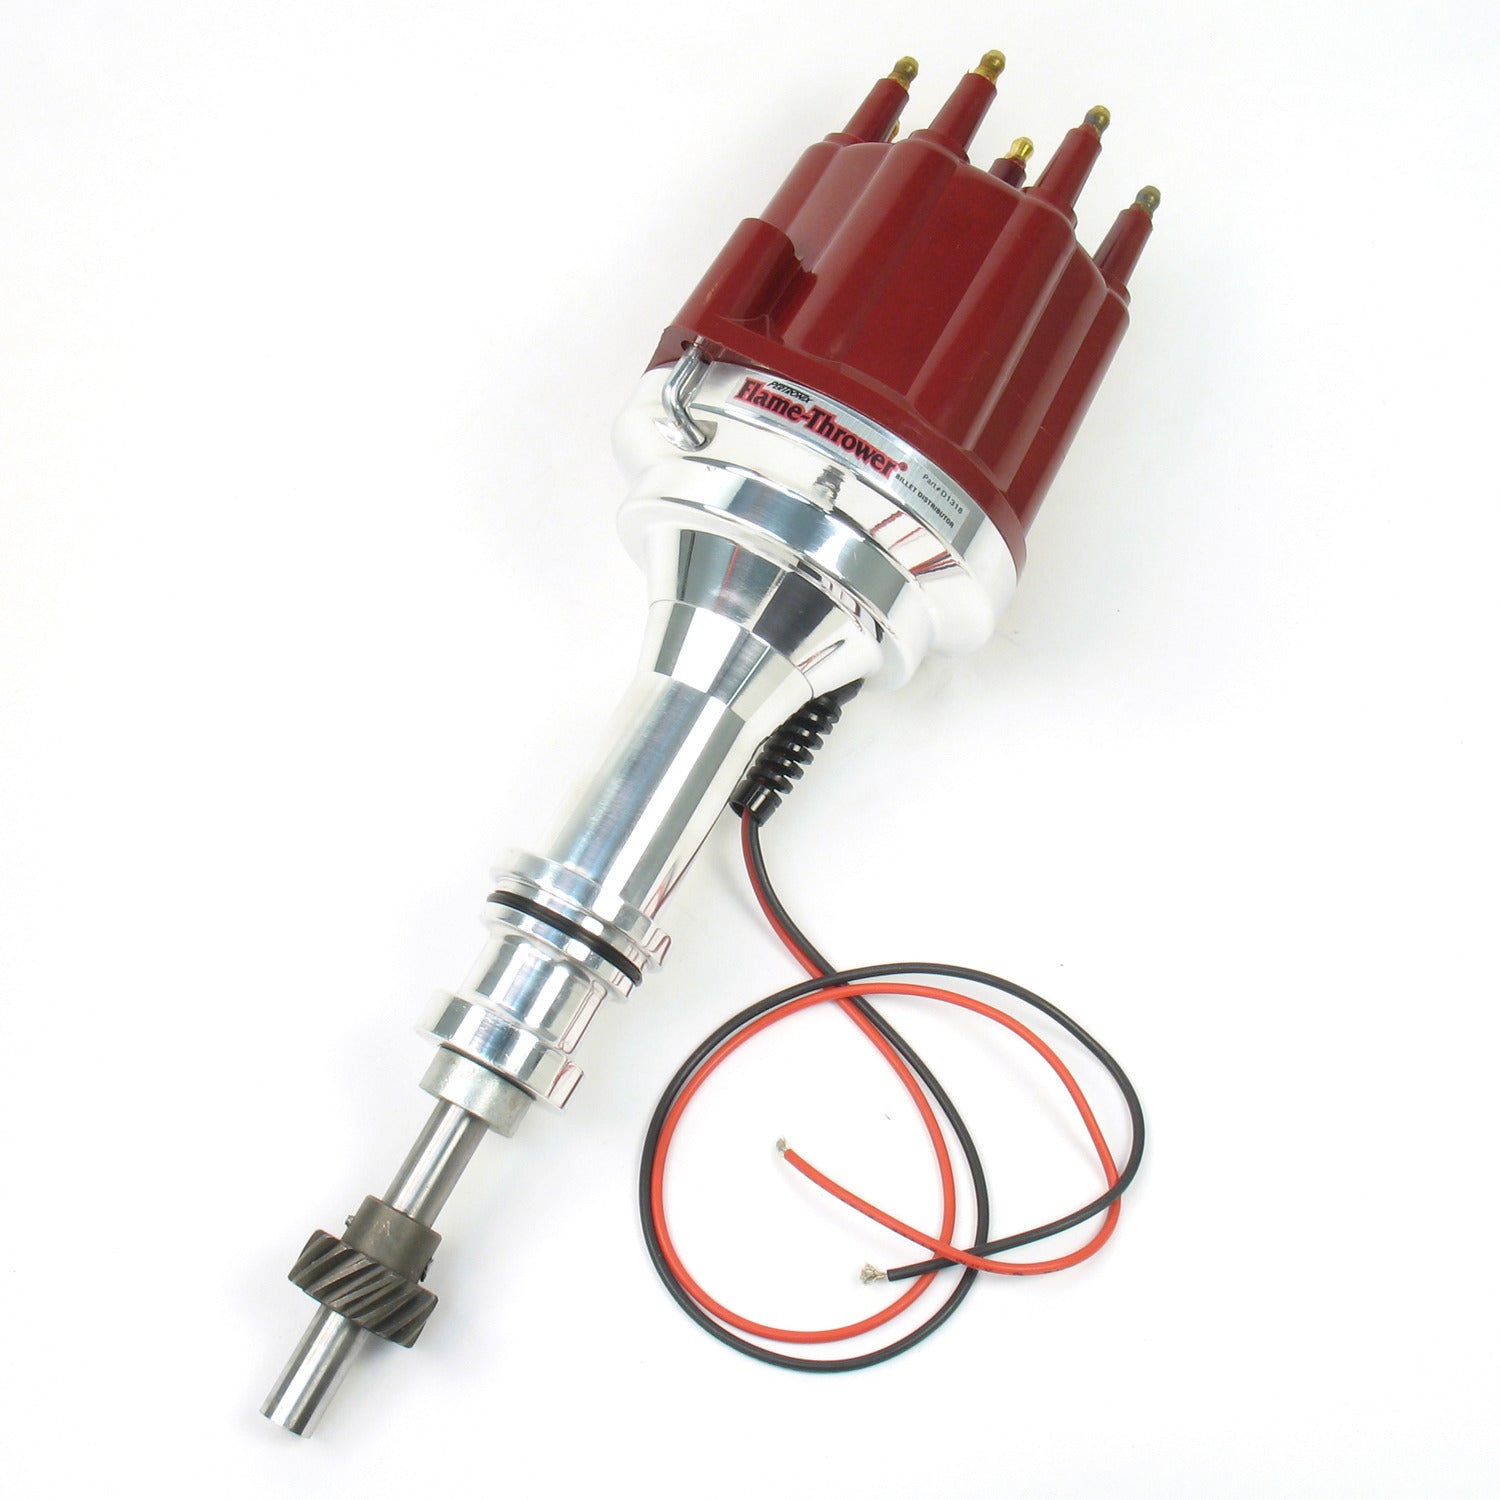 PerTronix D131811 Flame-Thrower Electronic Distributor Billet Ford 351W Plug and Play with Ignitor II Technology Non Vacuum Advance Red M Cap